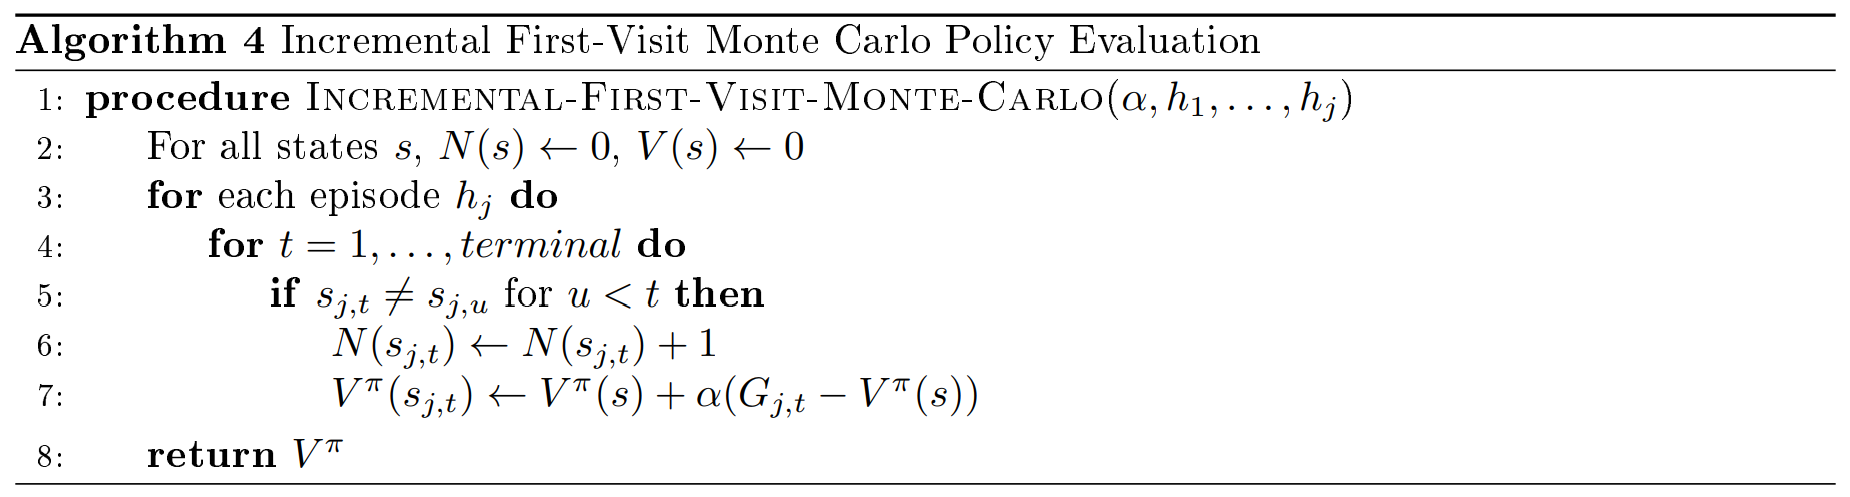 docs/stanford-cs234-notes-zh/img/fig3_alg_4.png